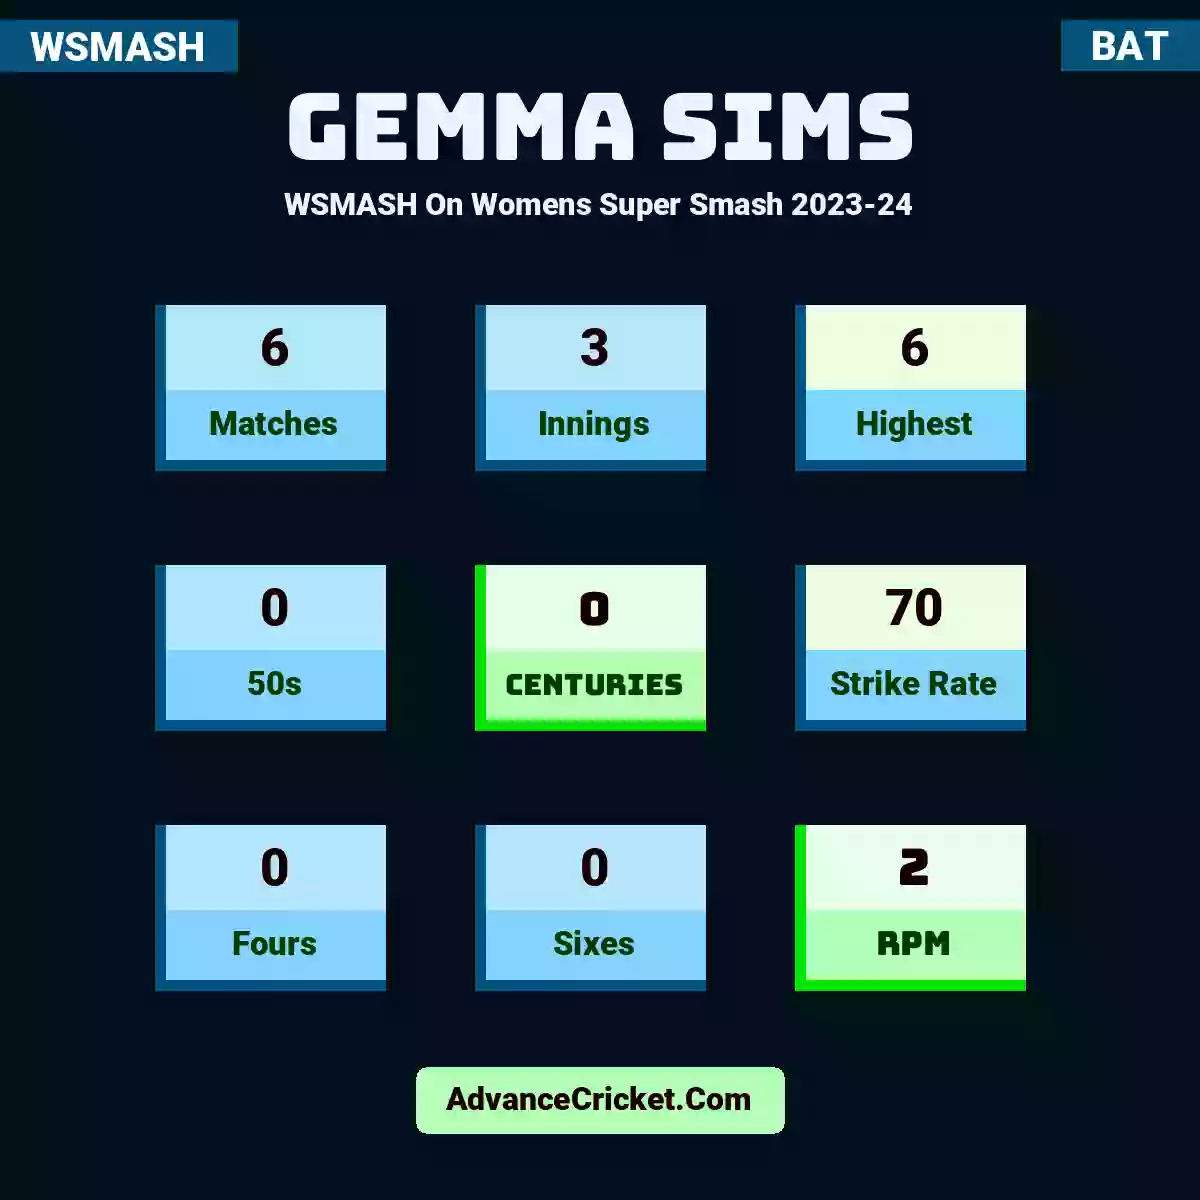 Gemma Sims WSMASH  On Womens Super Smash 2023-24, Gemma Sims played 6 matches, scored 6 runs as highest, 0 half-centuries, and 0 centuries, with a strike rate of 70. G.Sims hit 0 fours and 0 sixes, with an RPM of 2.